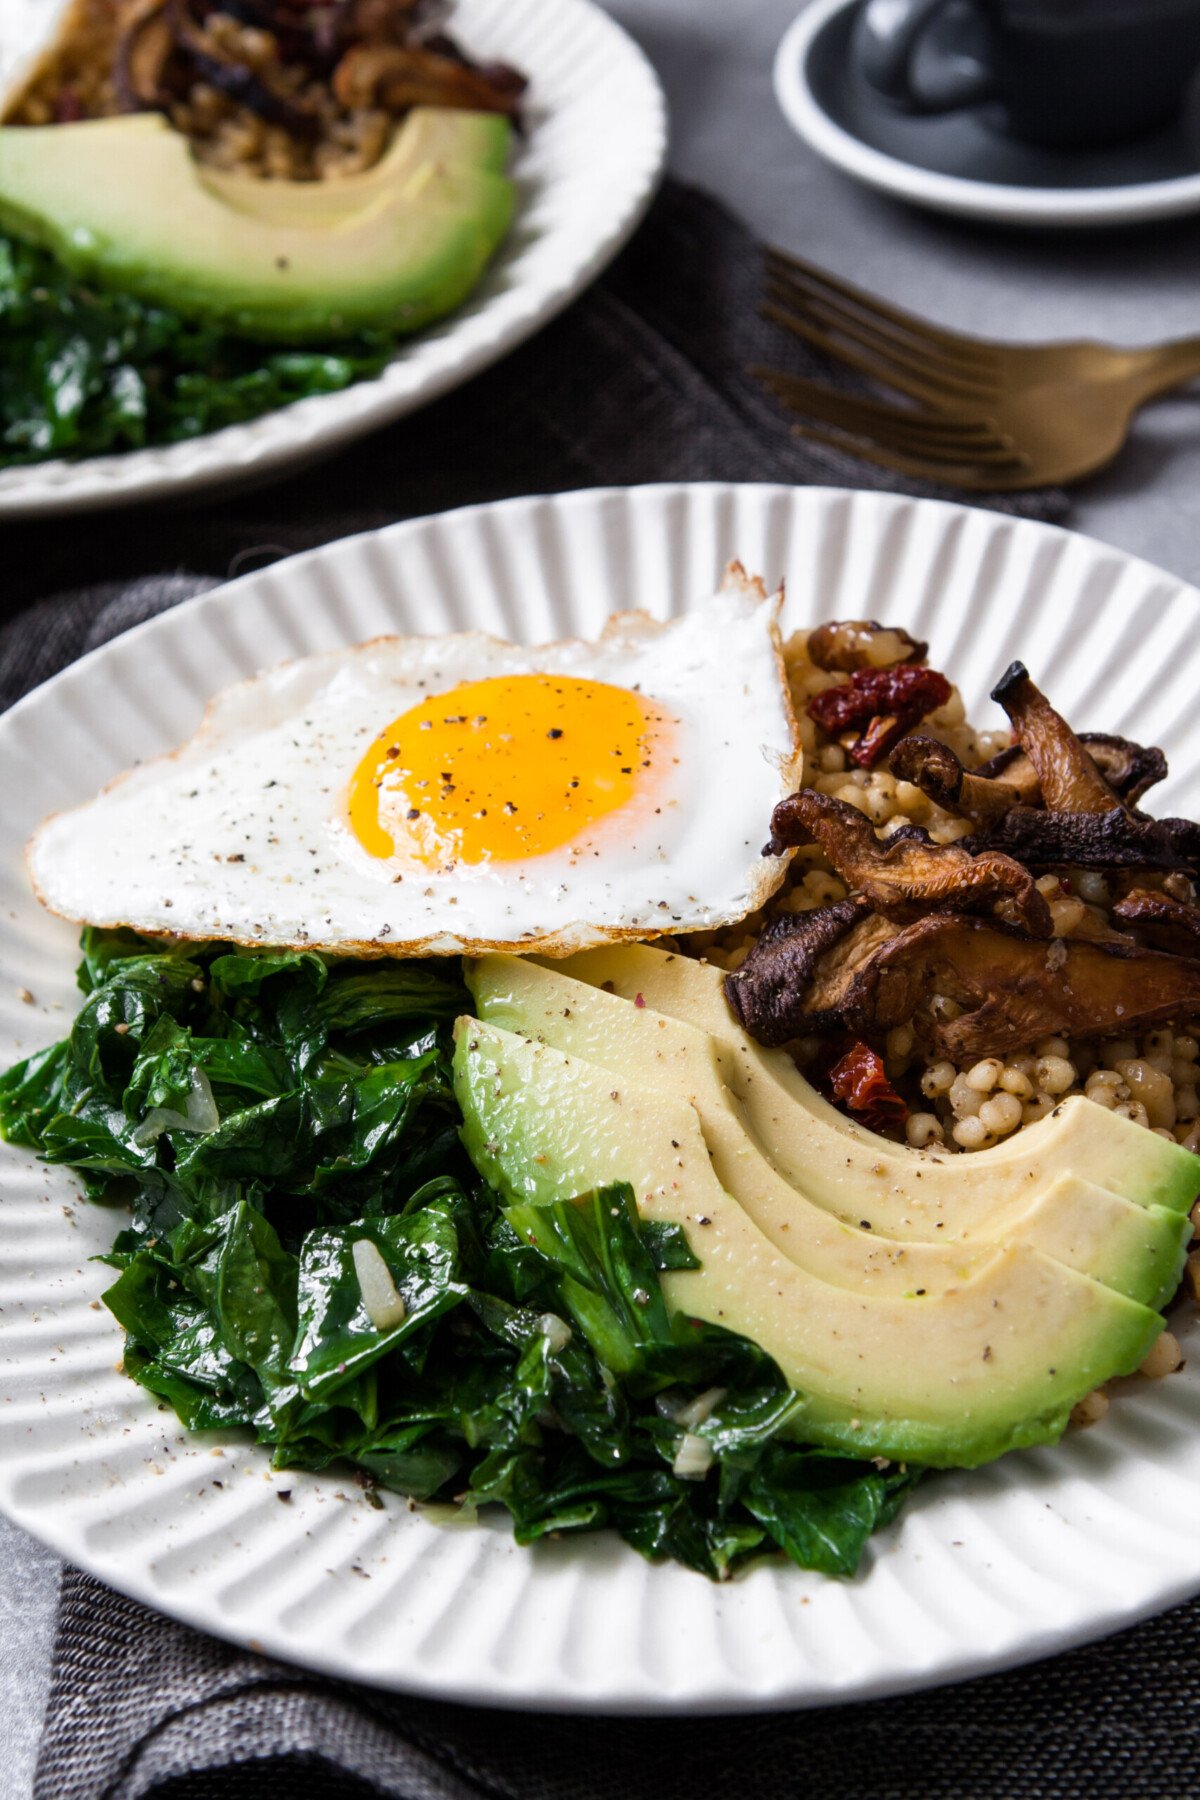  two white bowls filled with grains, sautéed greens, sliced avocado, and topped with a sunny side up egg